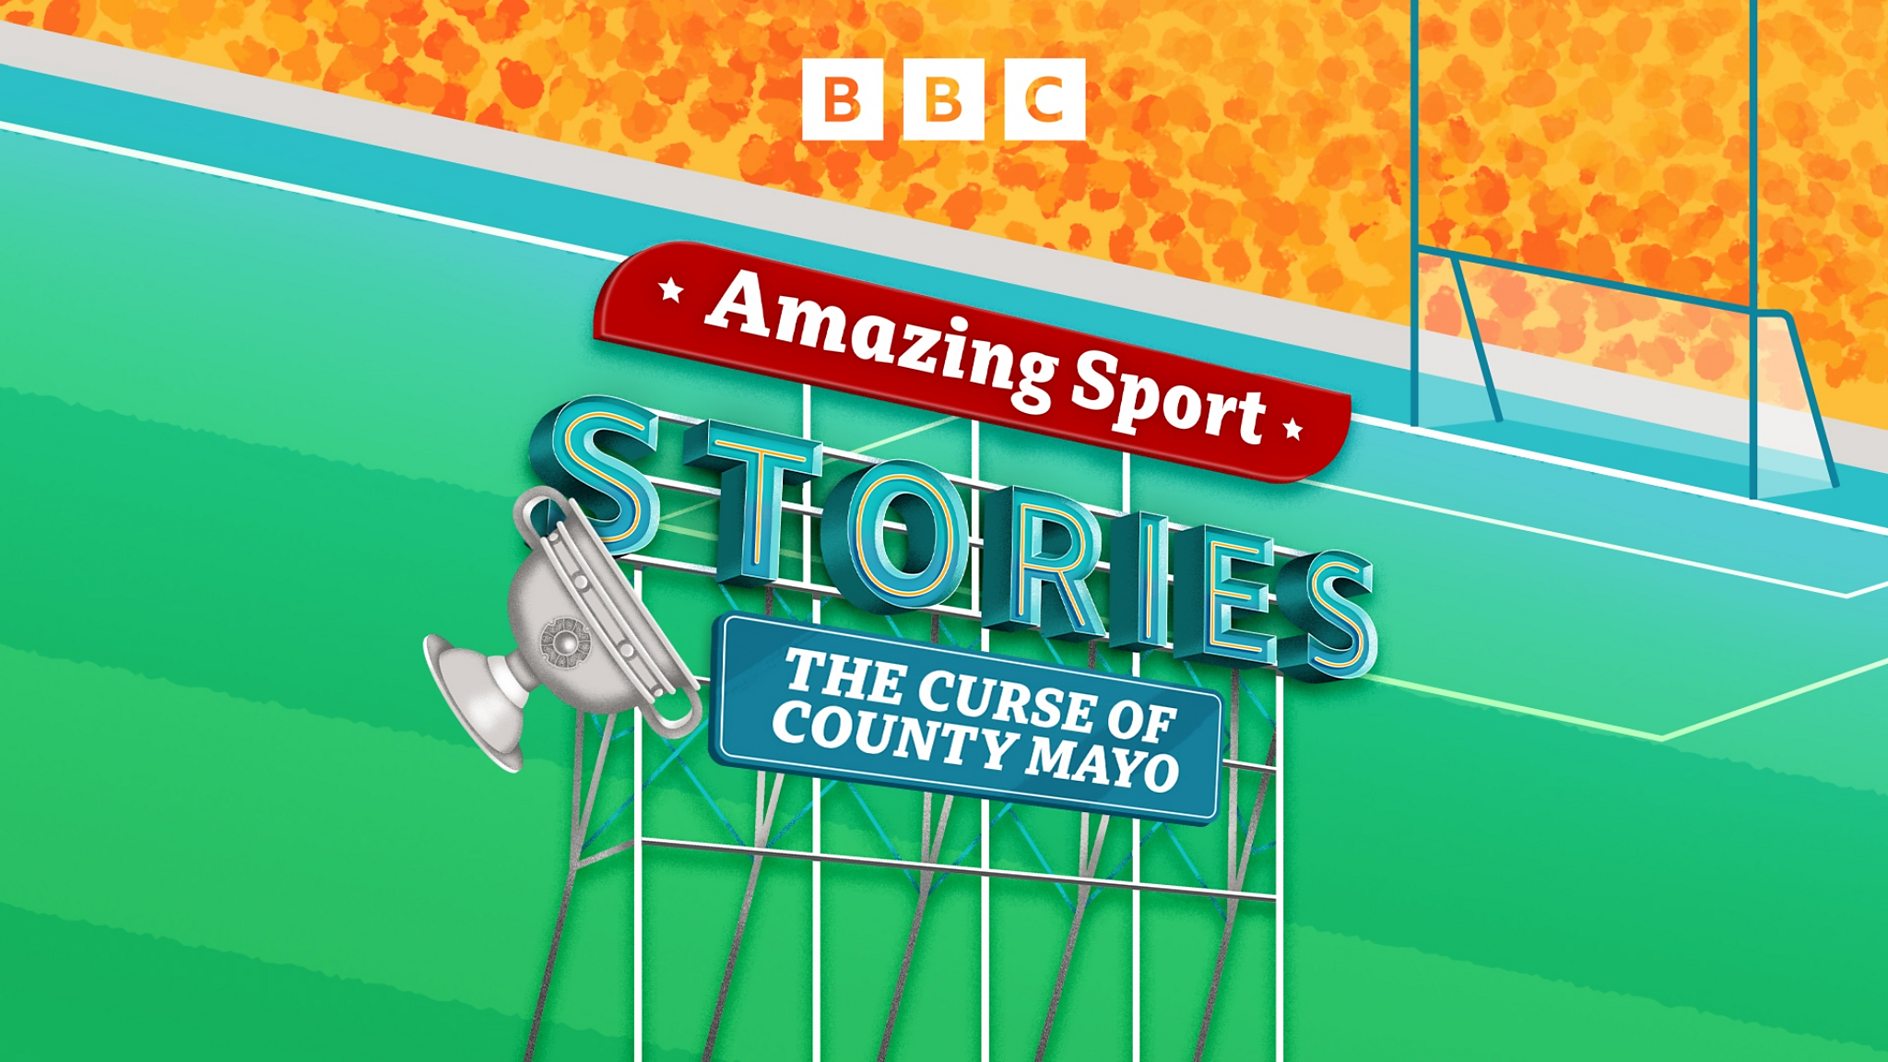 BBC World Service’s new season of Amazing Sport Stories investigates The Curse of County Mayo